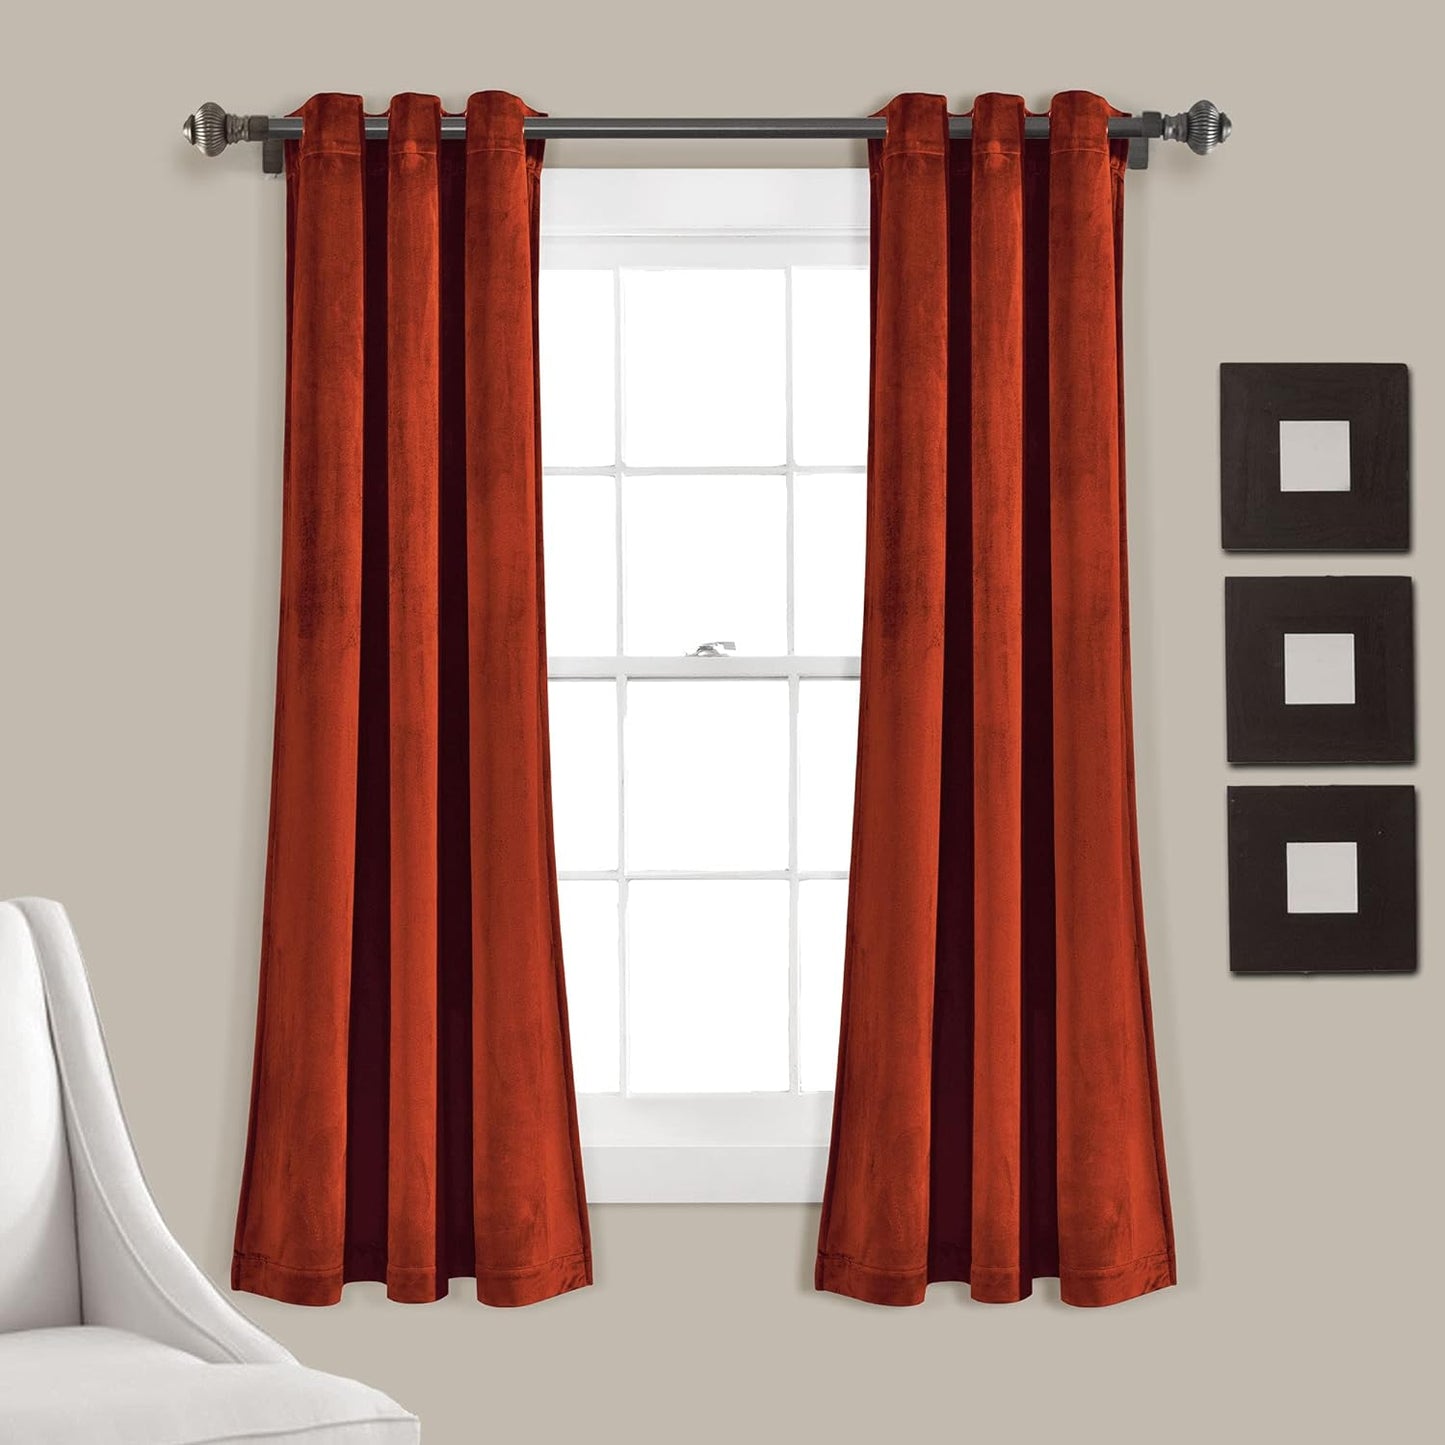 Lush Decor Prima Velvet Curtains Color Block Light Filtering Window Panel Set for Living, Dining, Bedroom (Pair), 38" W X 84" L, Navy  Triangle Home Fashions Rust Room Darkening 38"W X 63"L